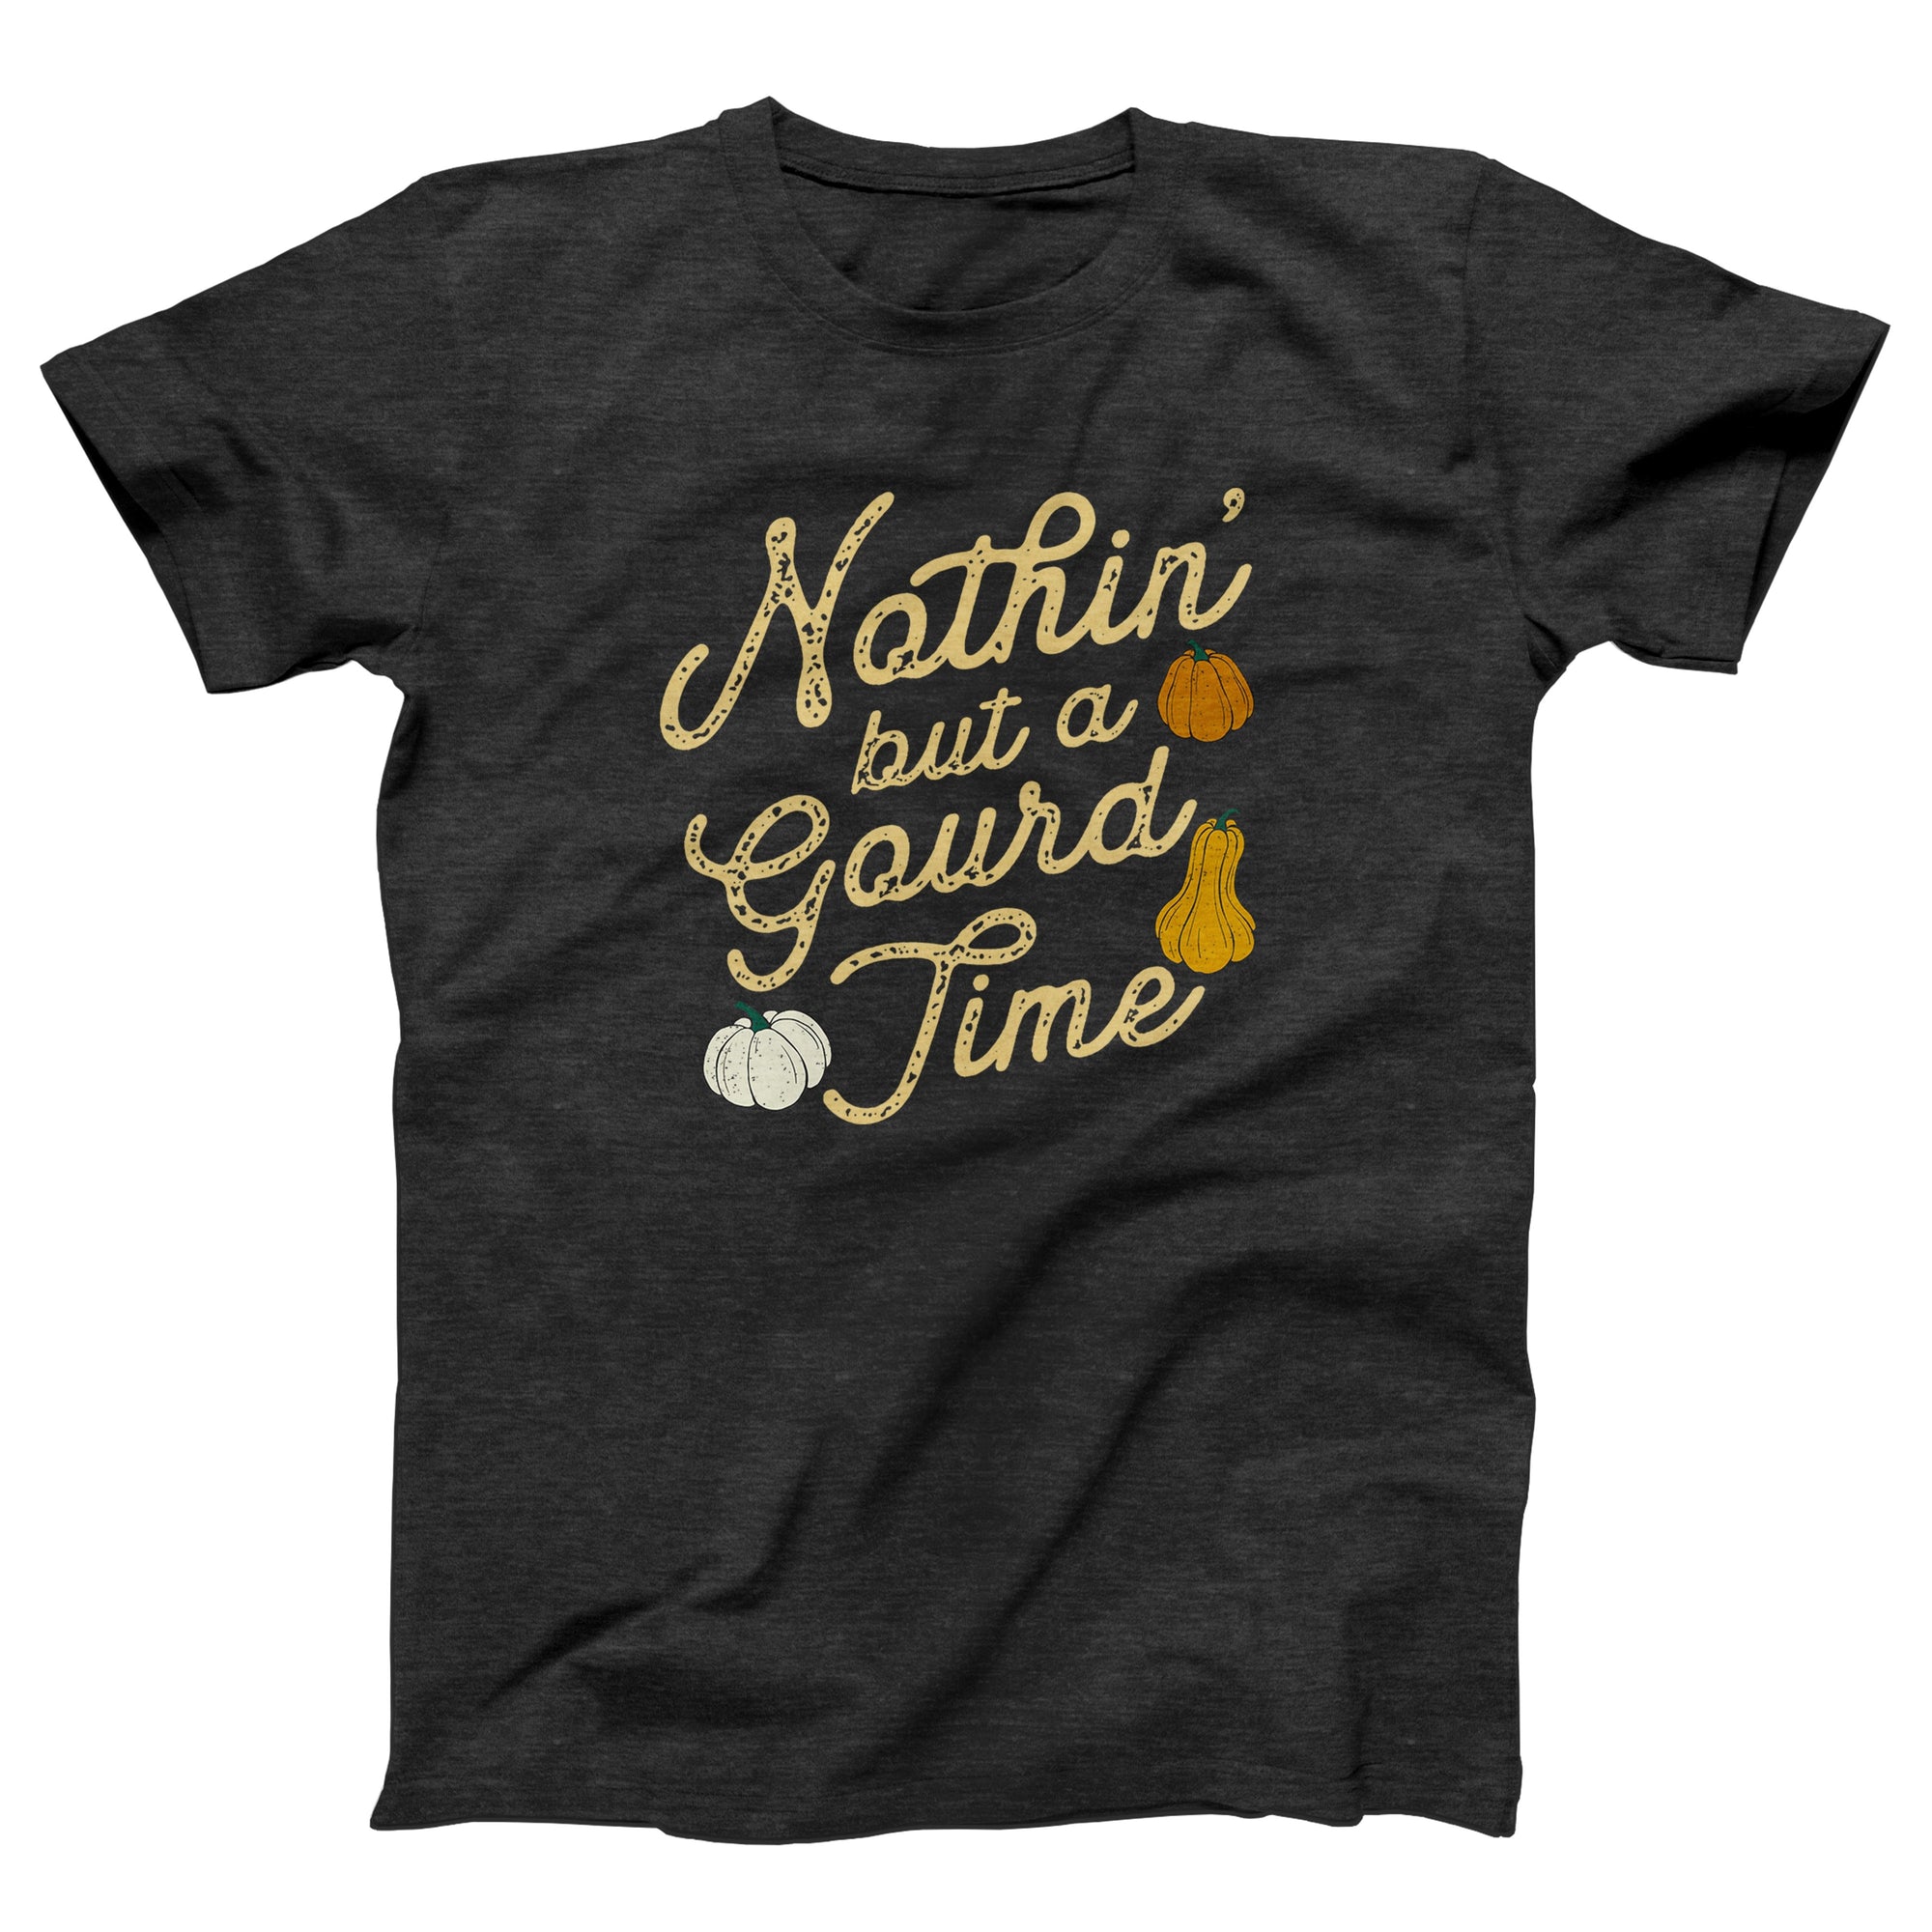 Nothin' But a Gourd Time Adult Unisex T-Shirt - anishphilip